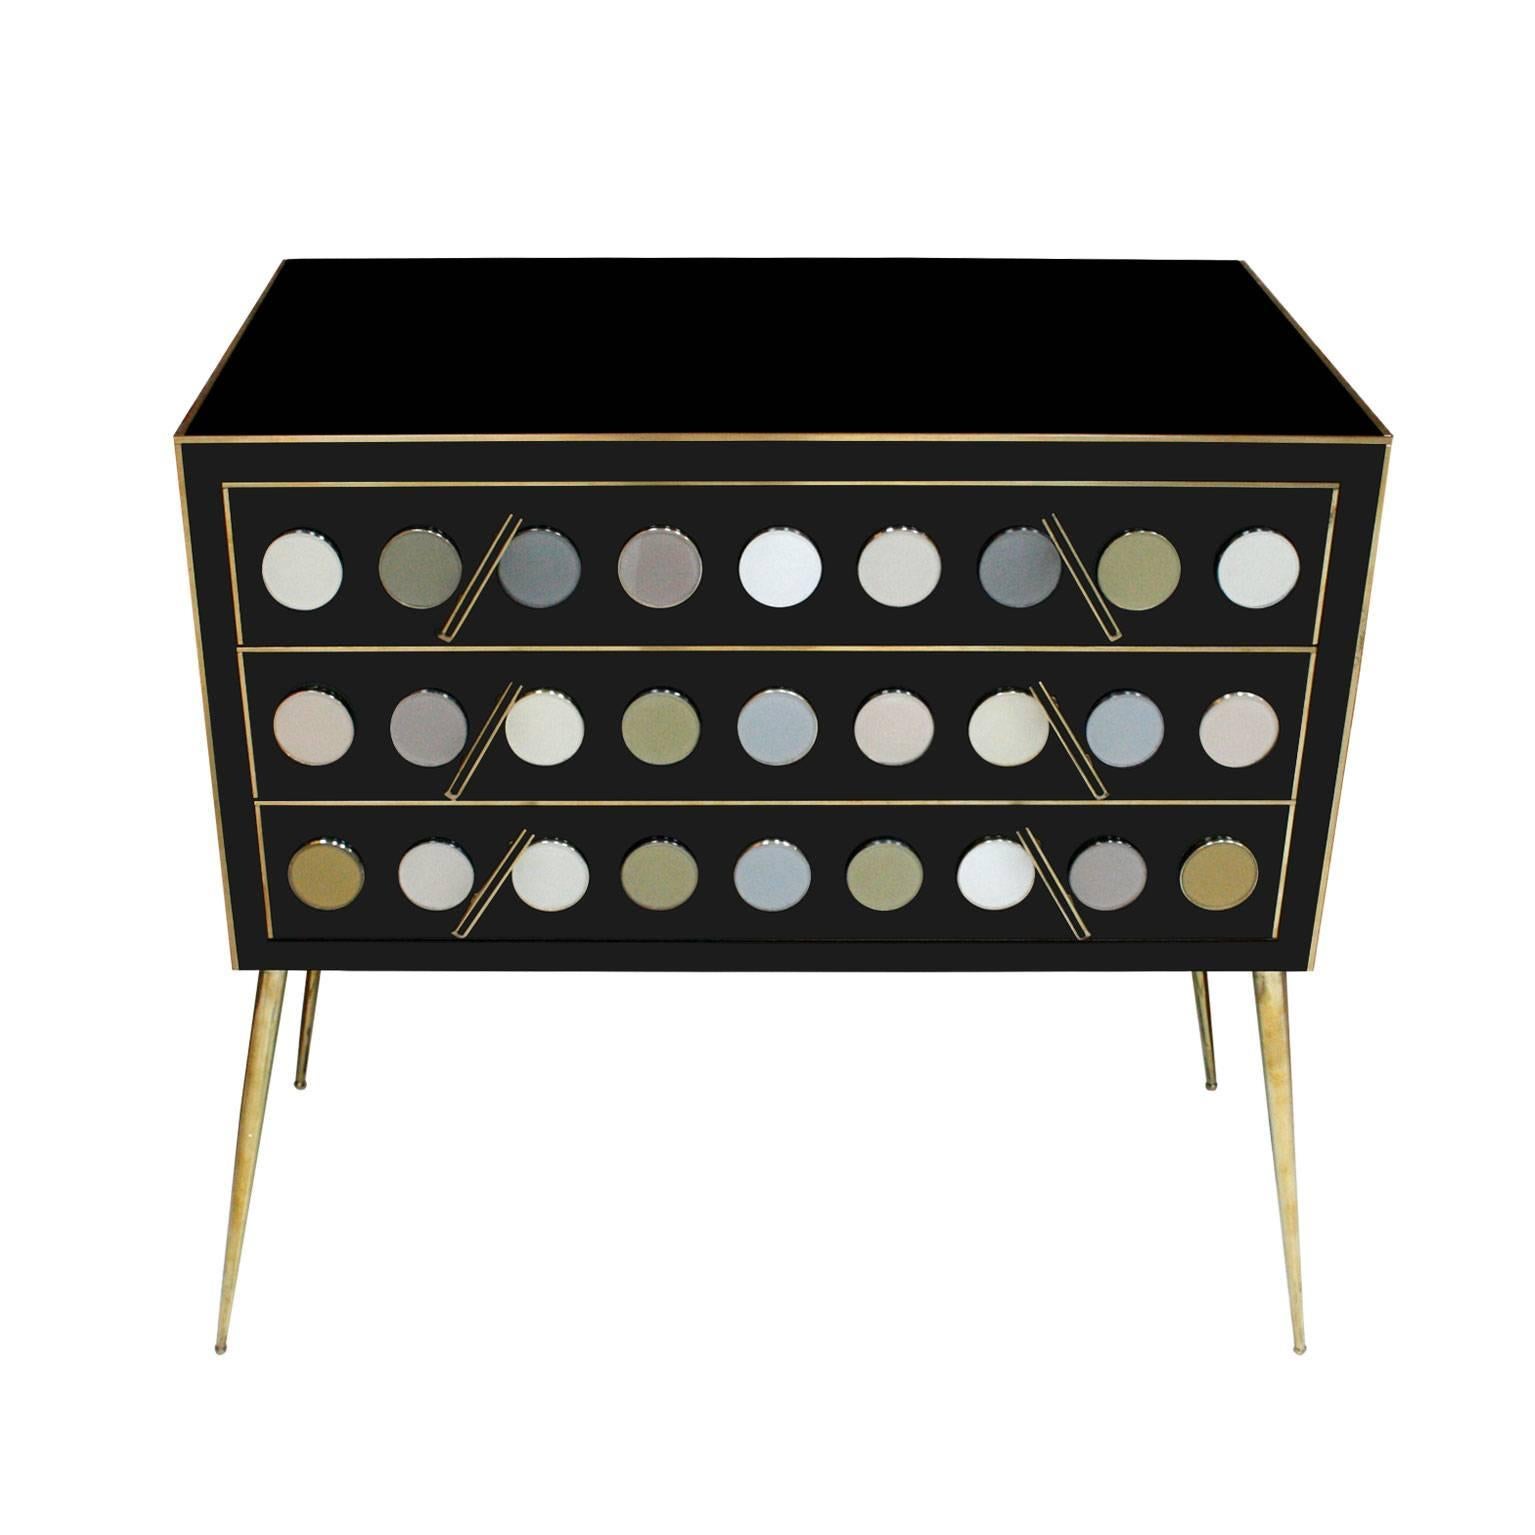 Italian commode composed of three drawers. Structure made of solid wood covered in Murano glass. Legs, handles and details are made of brass.

Every item LA Studio offers is checked by our team of 10 craftsmen in our in-house workshop. Special